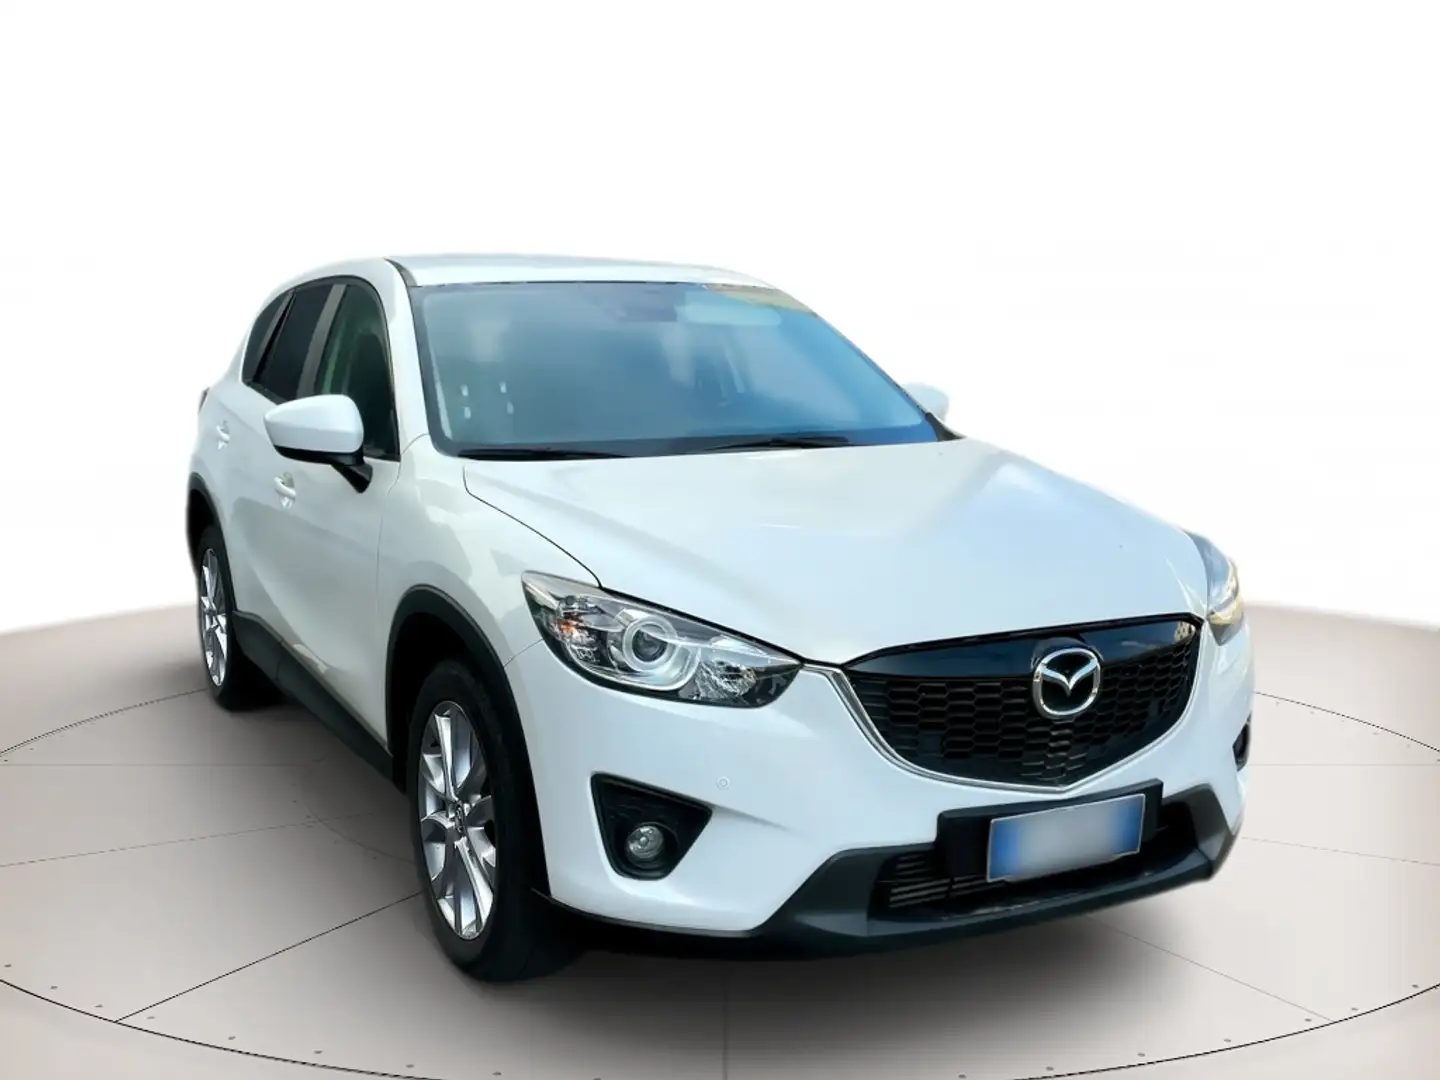 Mazda CX-5 I - CX-5 2.2 Exceed 4wd 150cv 6at Wit - 2